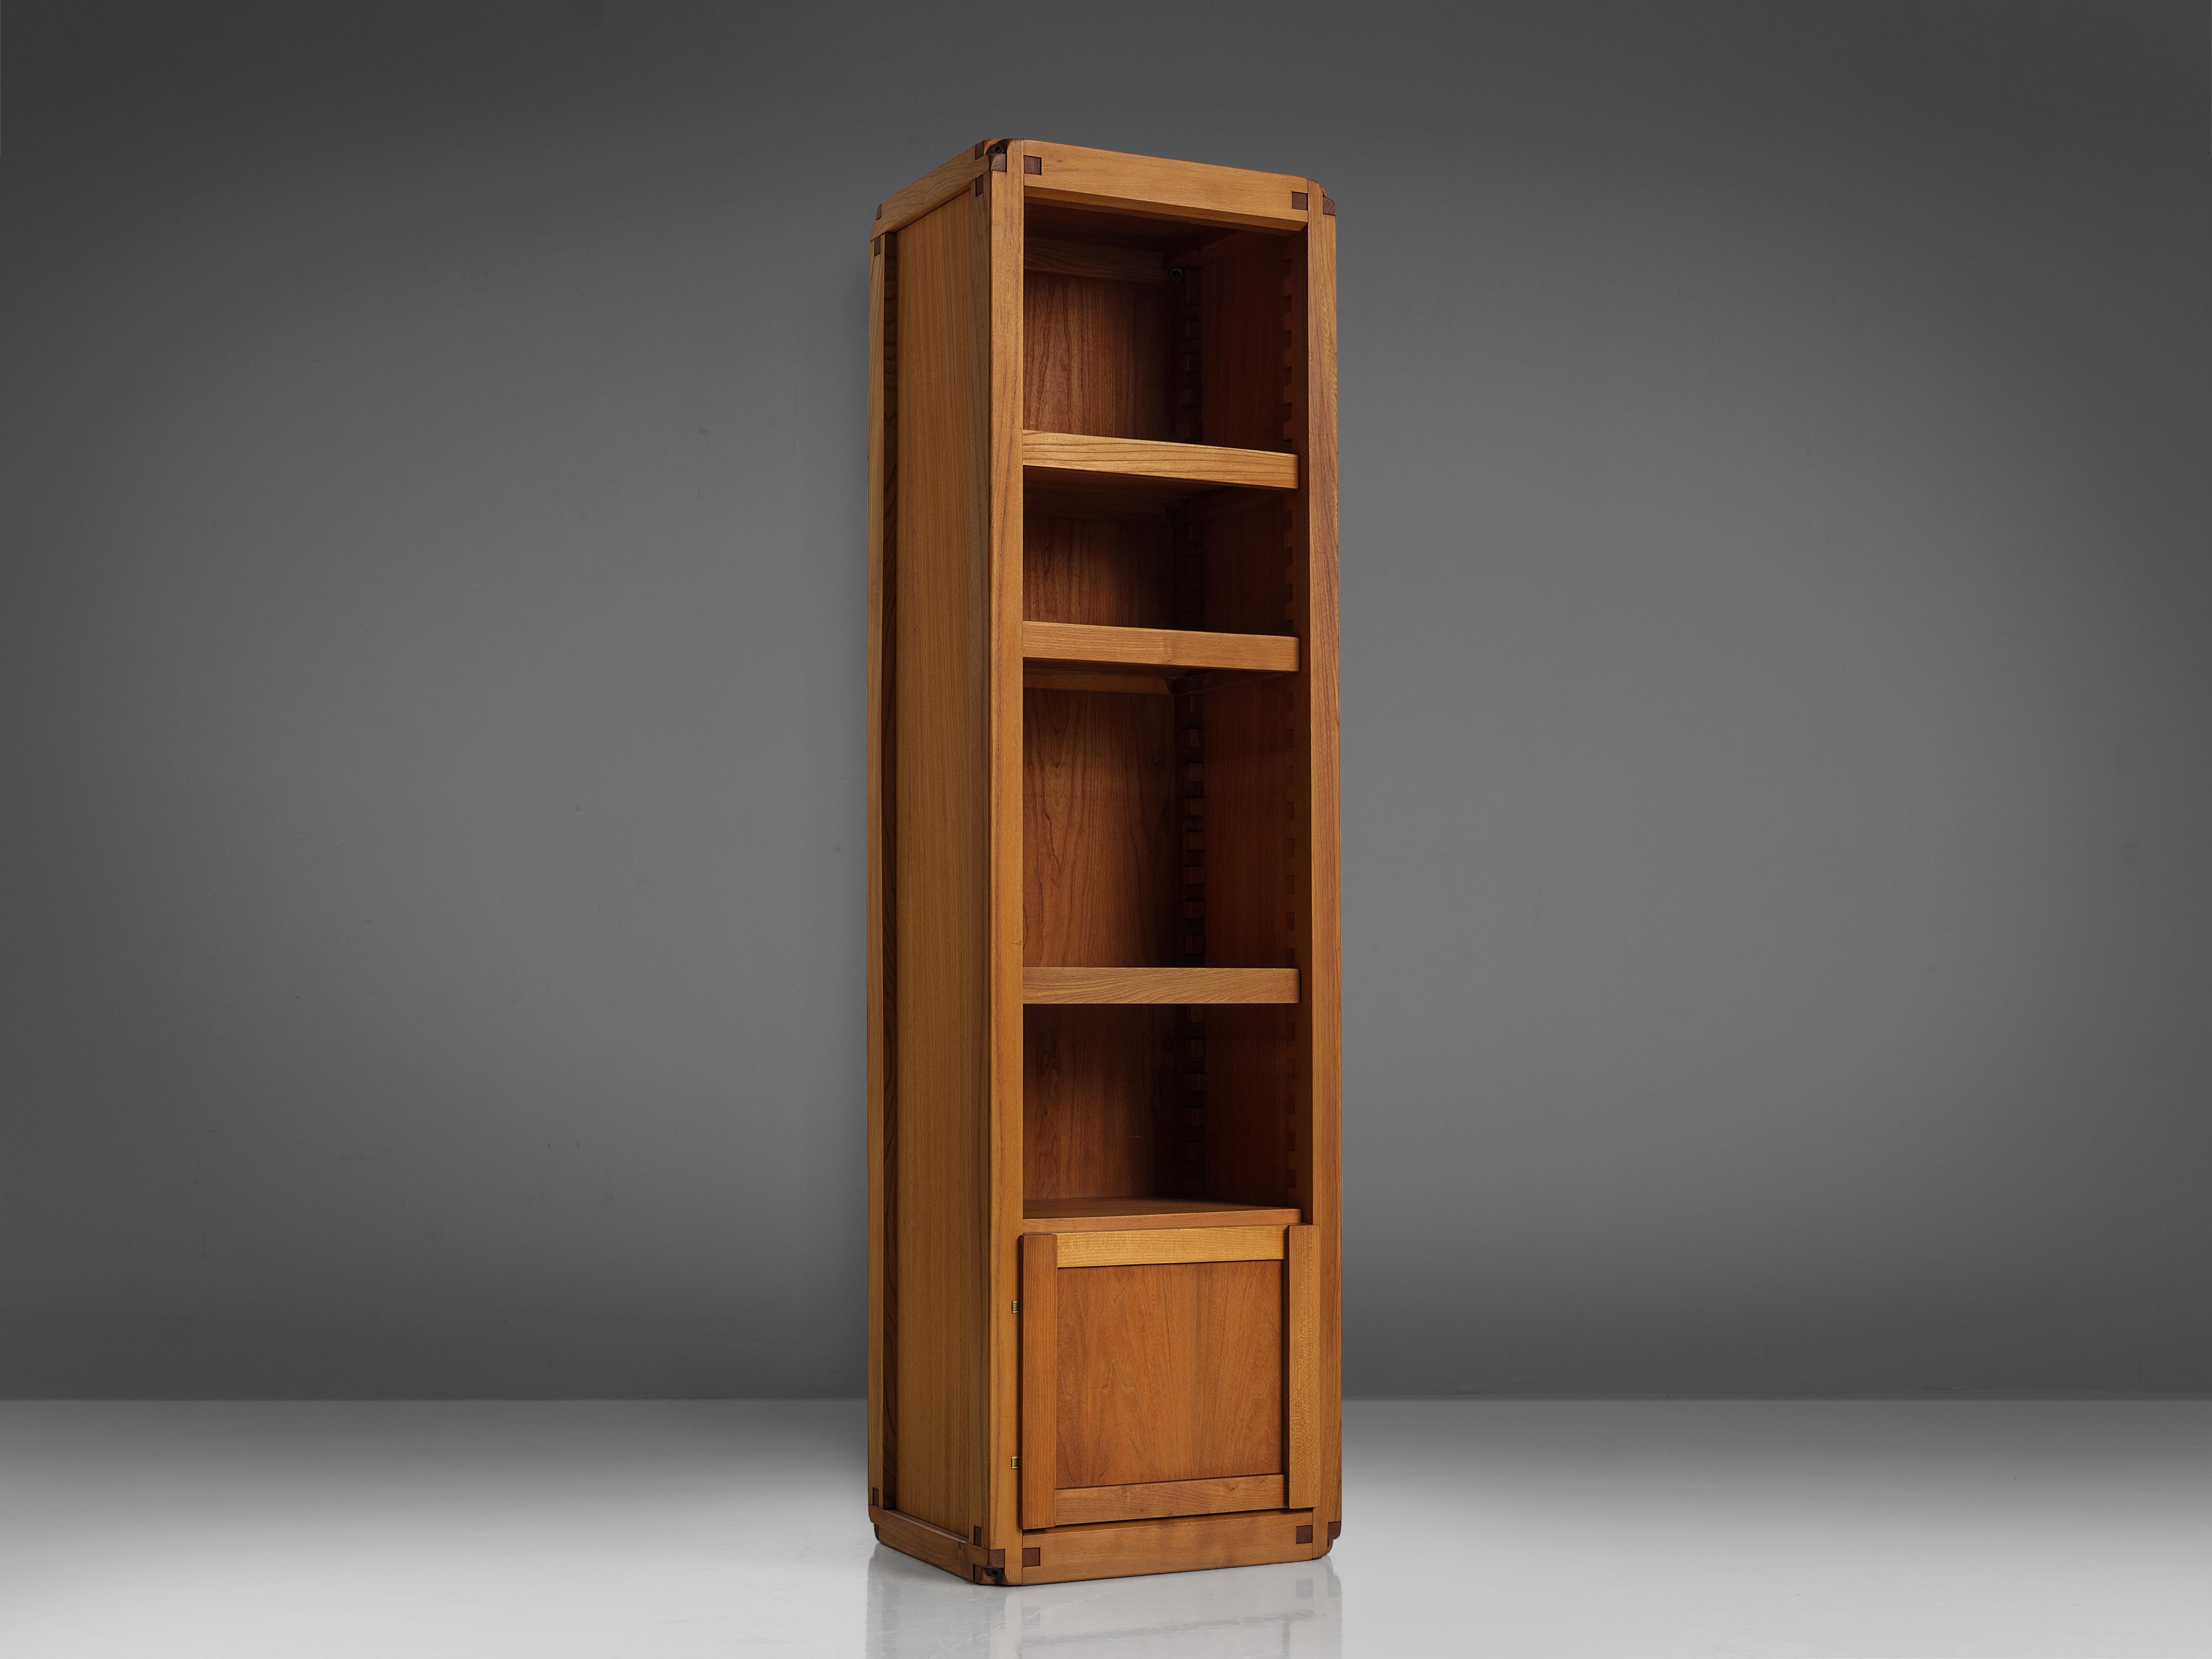 Pierre Chapo, cabinet model 'B10', solid elm, France, 1960s

This bookcase or high cabinet is designed by the French designer Pierre Chapo. It is a piece of furniture that is modular and therefore could be designed according to the client’s own